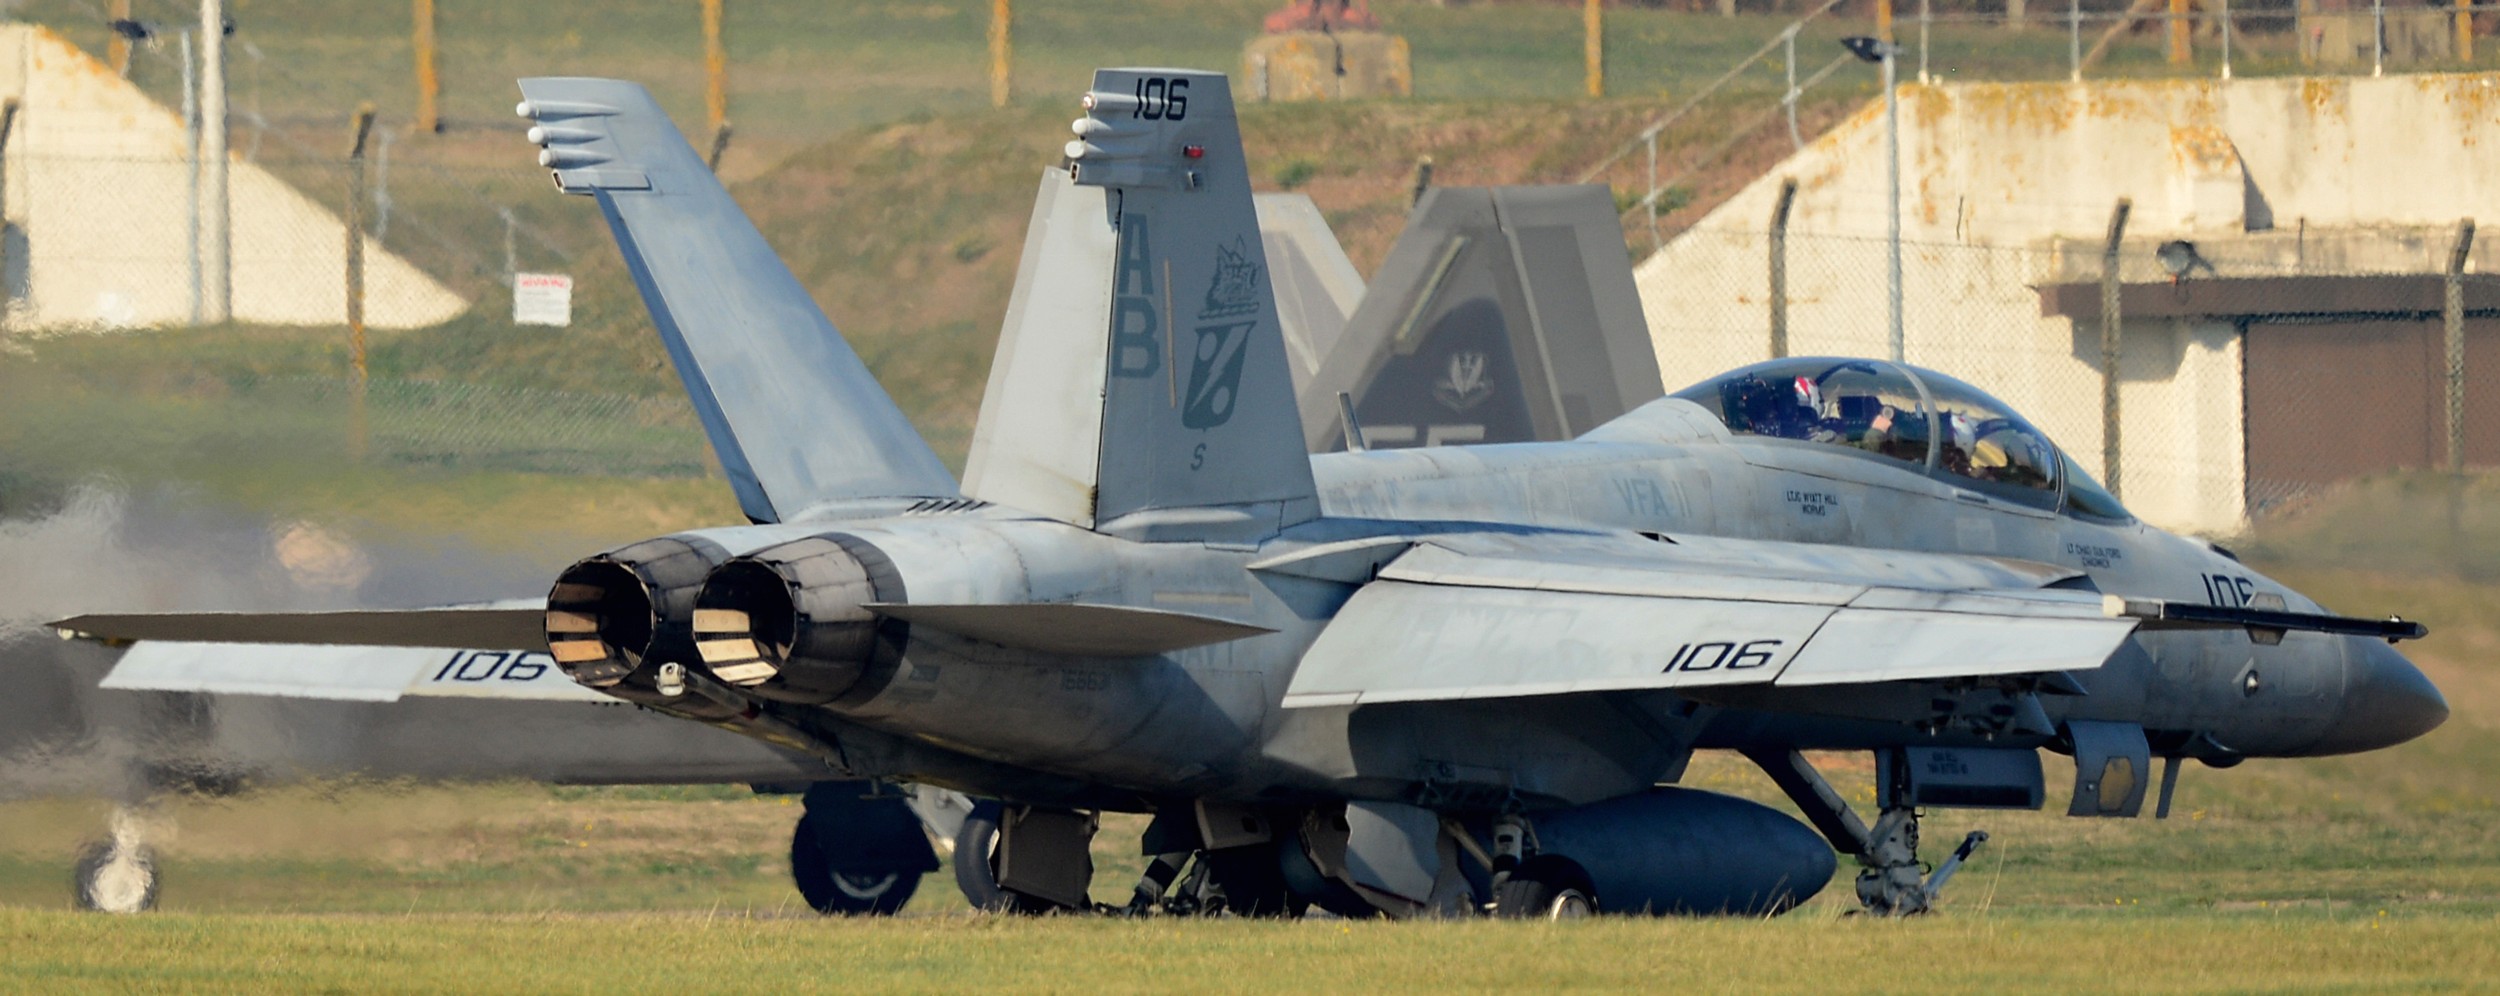 vfa-11 red rippers strike fighter squadron us navy f/a-18f super hornet raf lakenheath uk 93